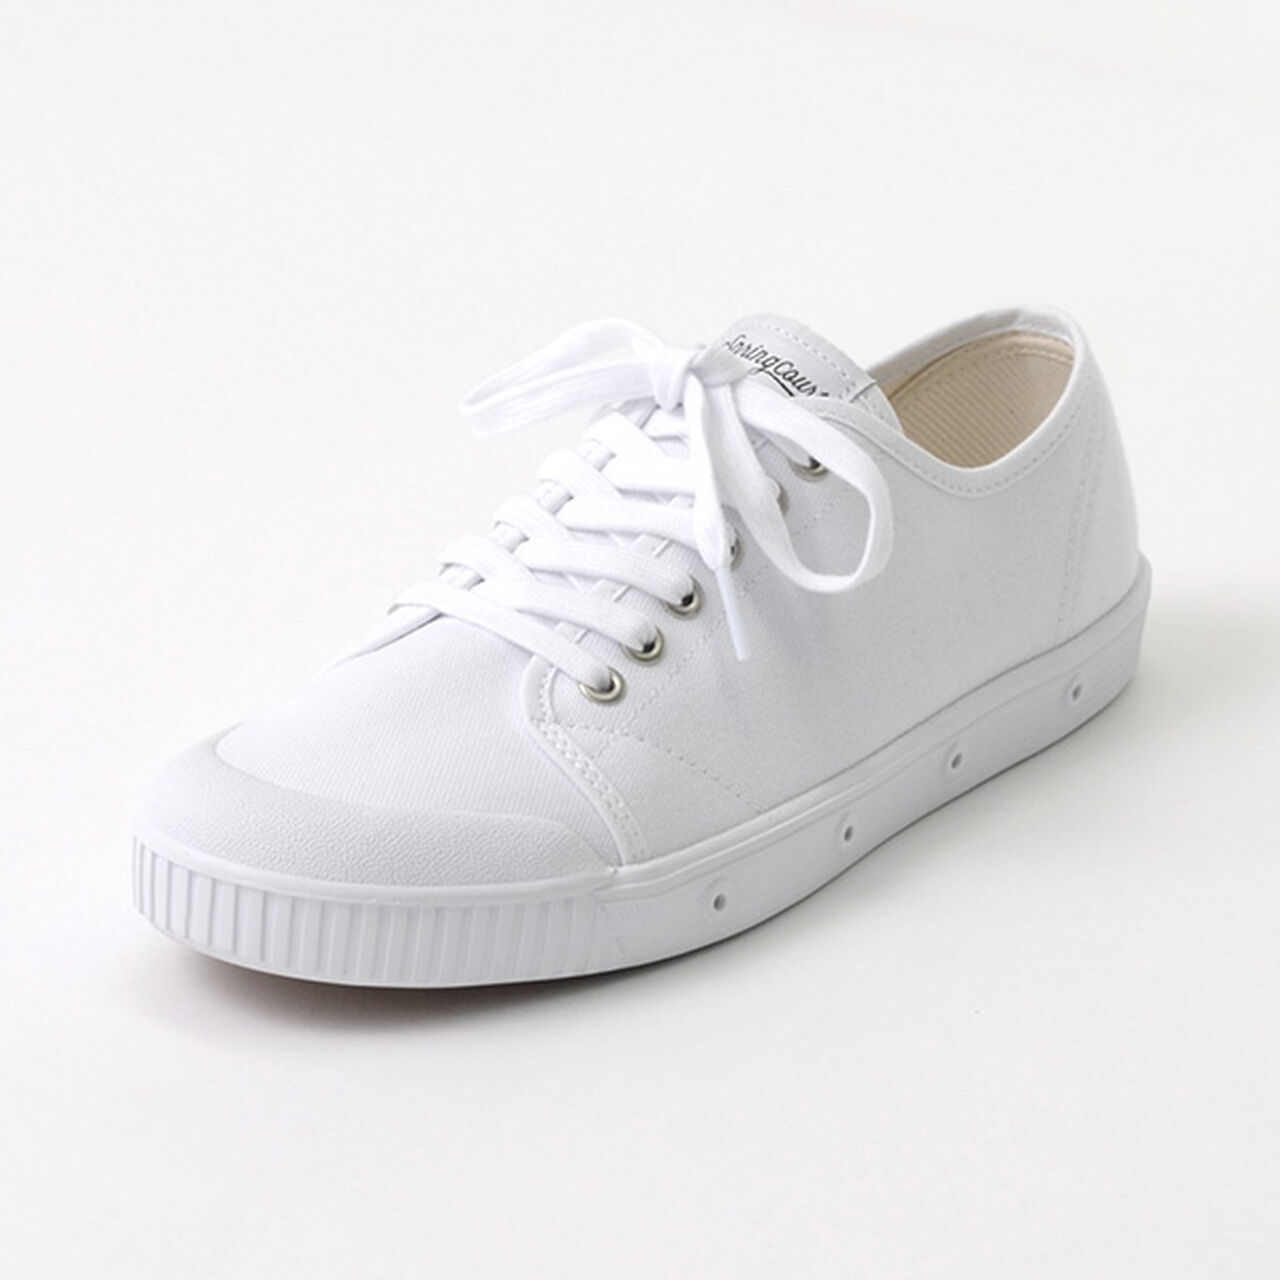 G2 Low Cut Canvas Sneakers,White, large image number 0